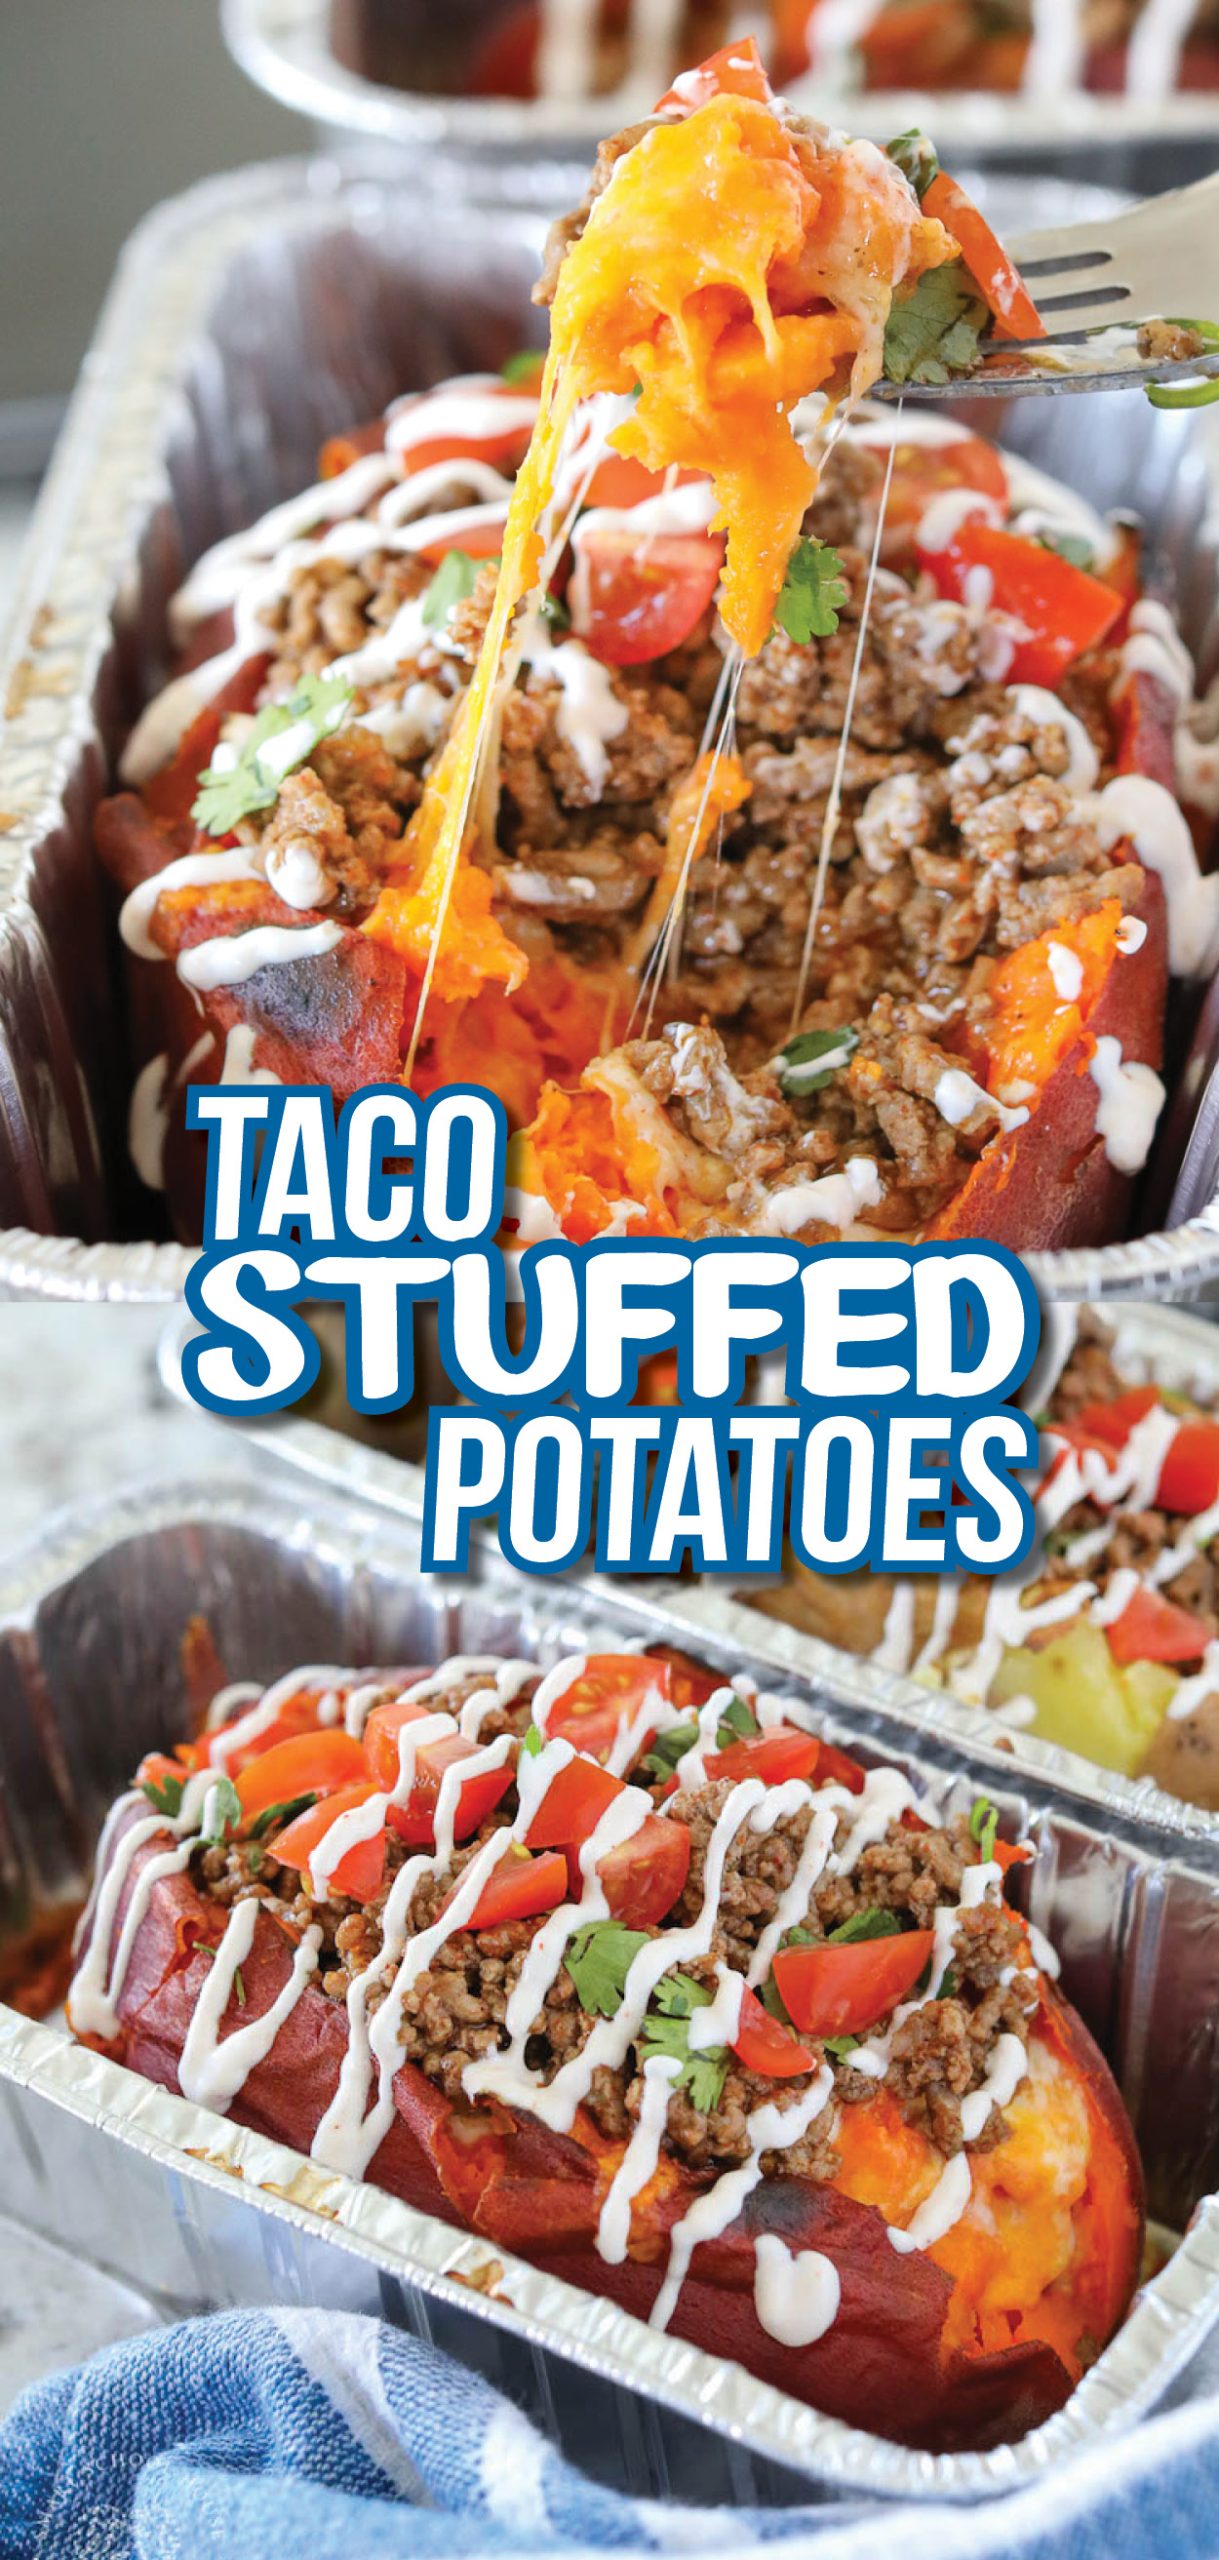 Taco Stuffed Potatoes are nutritious sweet potatoes OR russet potatoes overflowing with seasoned meat and classic taco toppings!